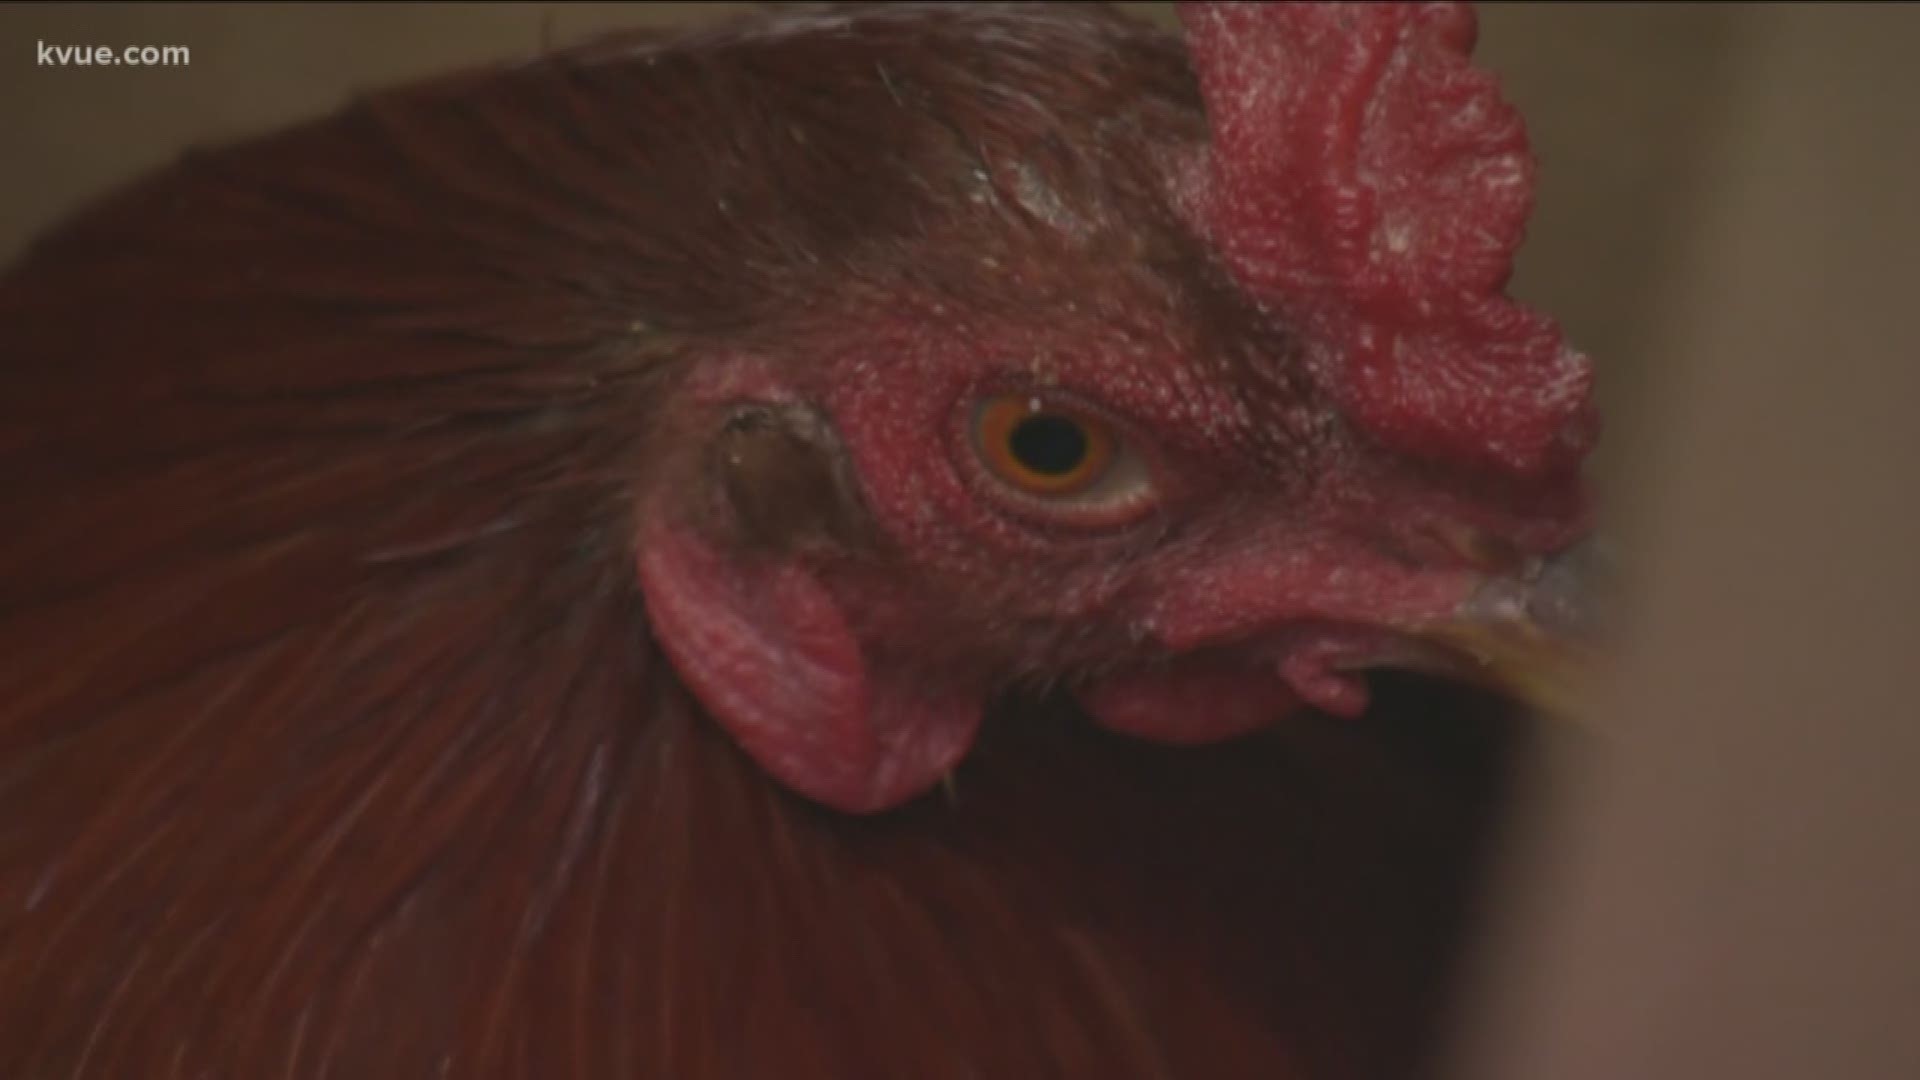 More than 100 roosters are now heading to a sanctuary after deputies rescued them from a cockfighting operation.